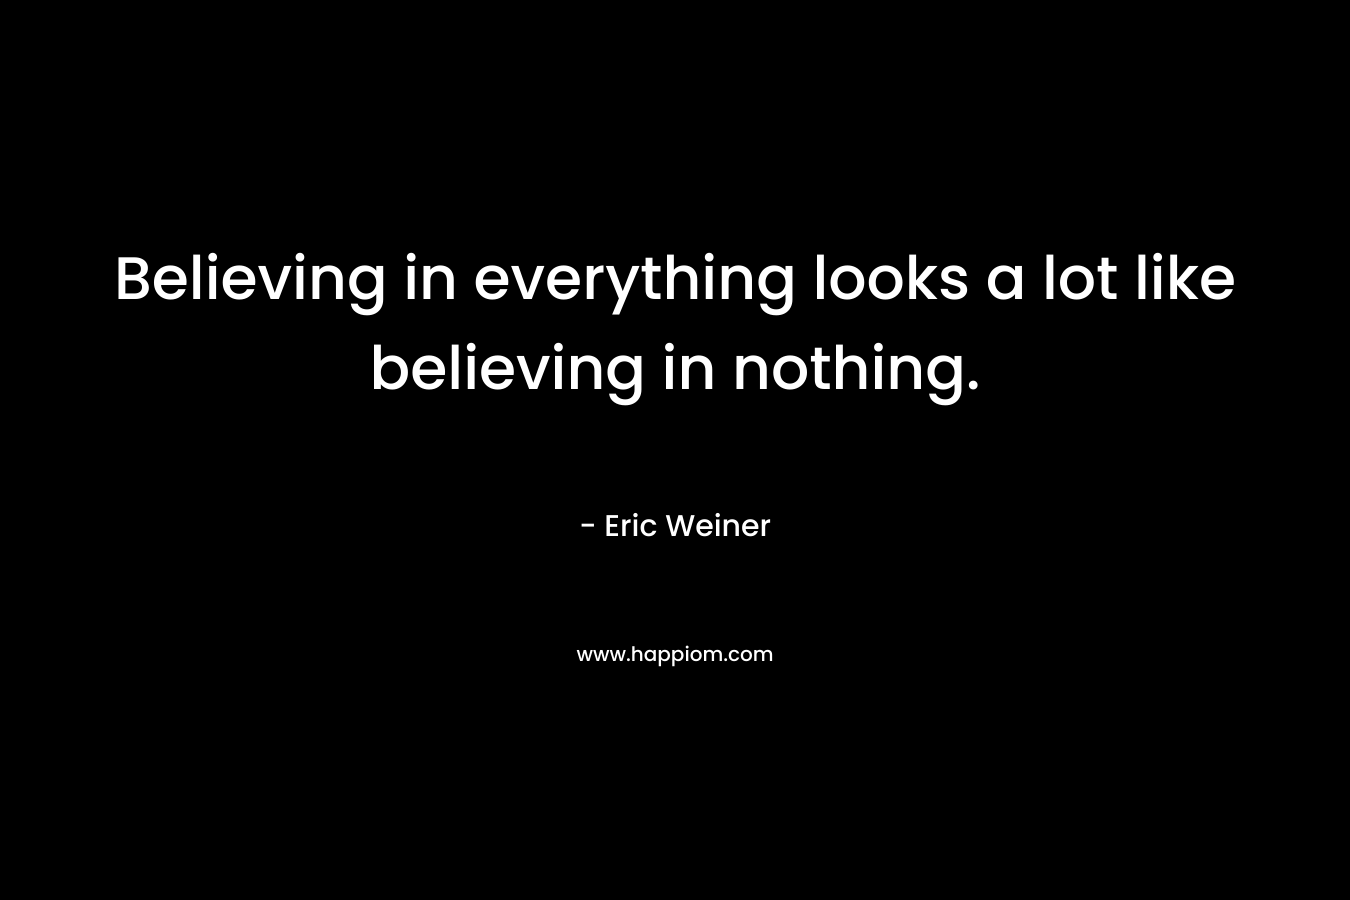 Believing in everything looks a lot like believing in nothing.